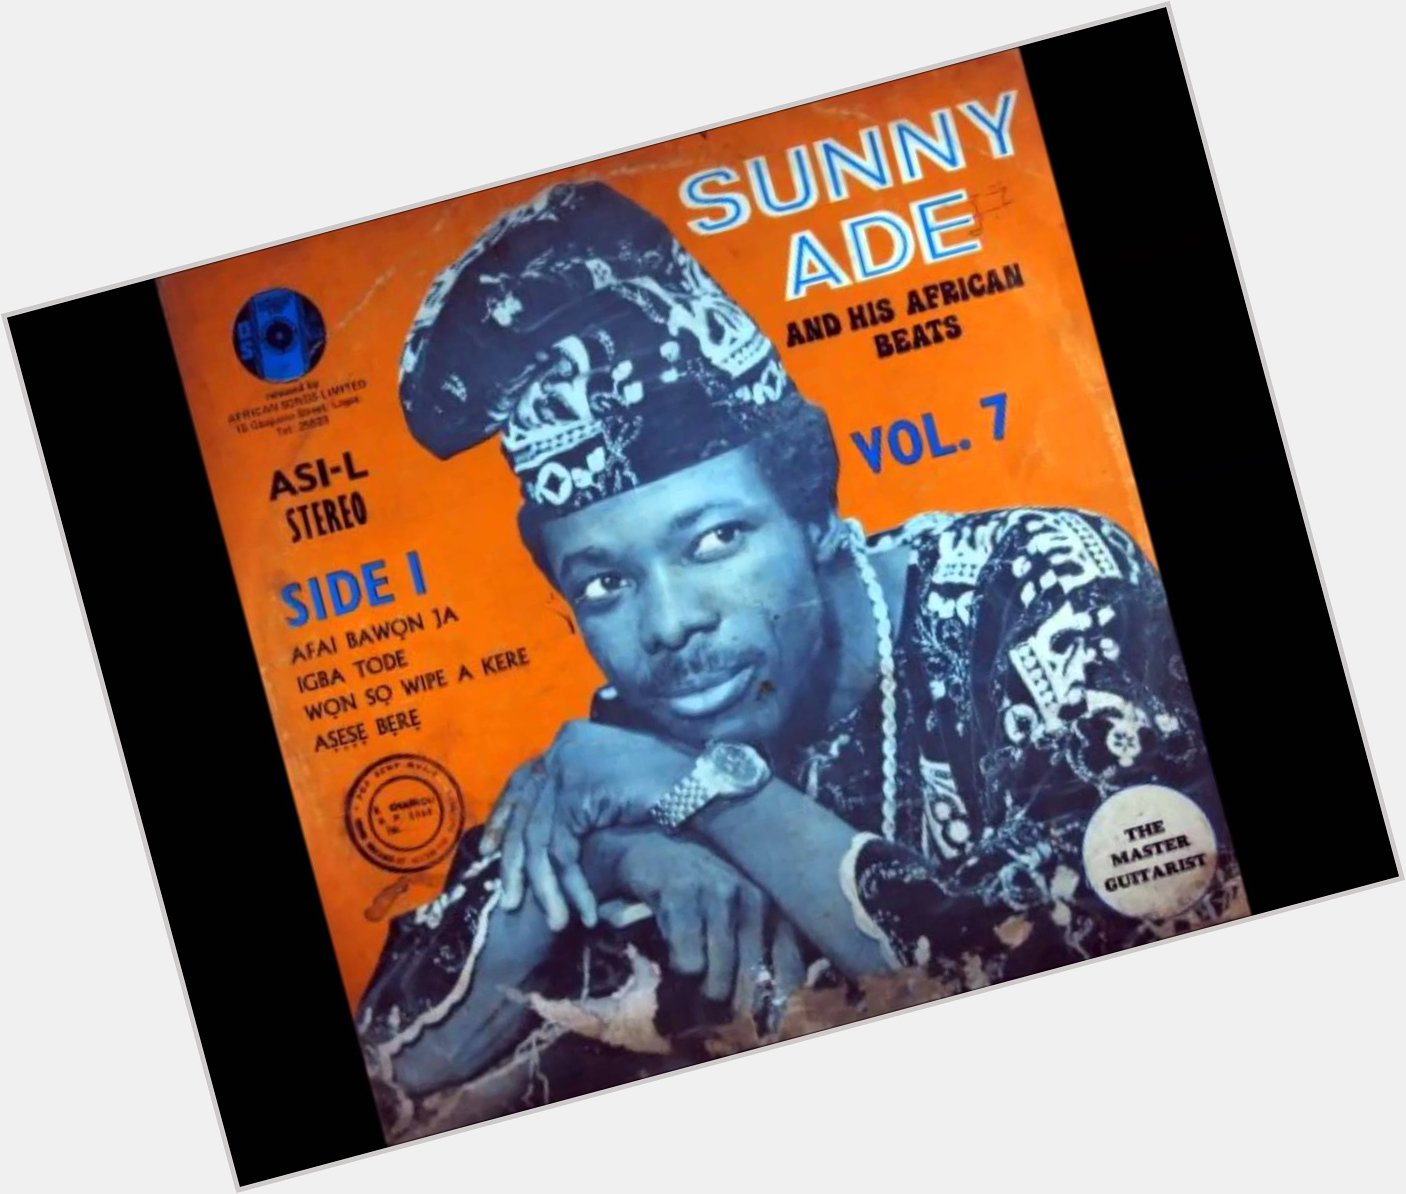 Happy 69th Birthday to King Sunny Ade. If I woke up on a weekend and this was playing I knew it was spring cleaning 